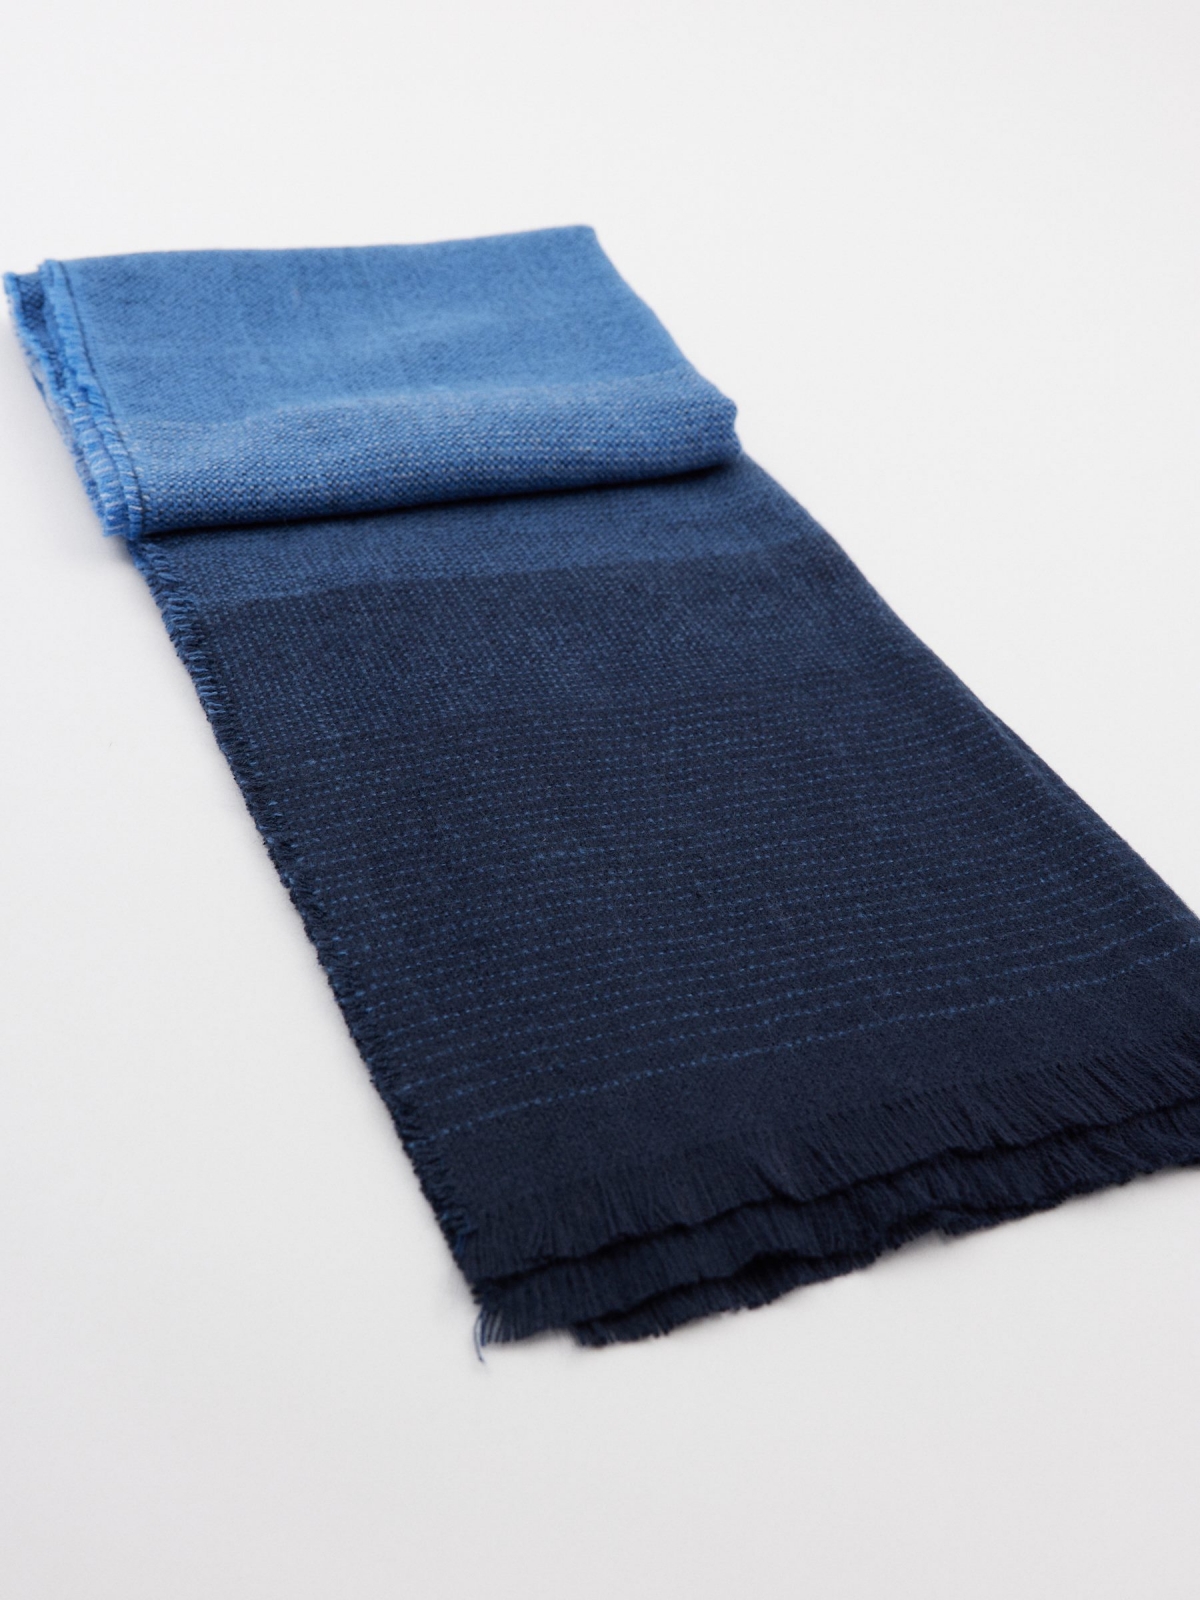 Men's scarf folded view